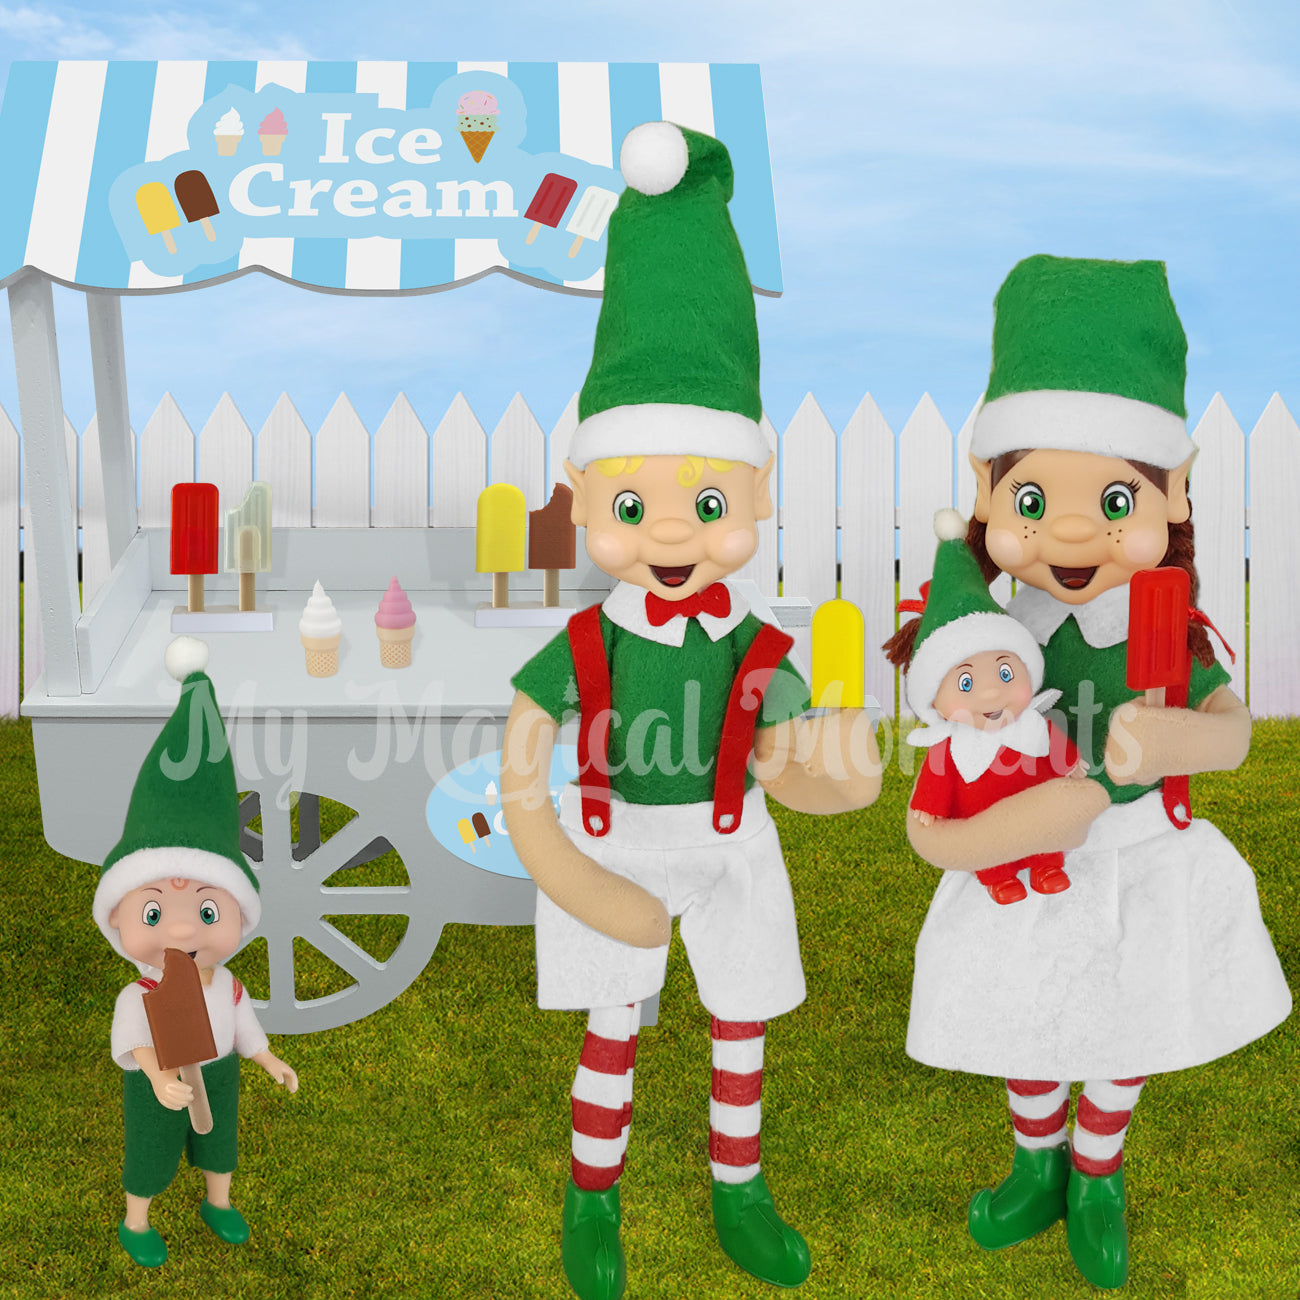 Elves eating ice cream as a family from an ice cream stand